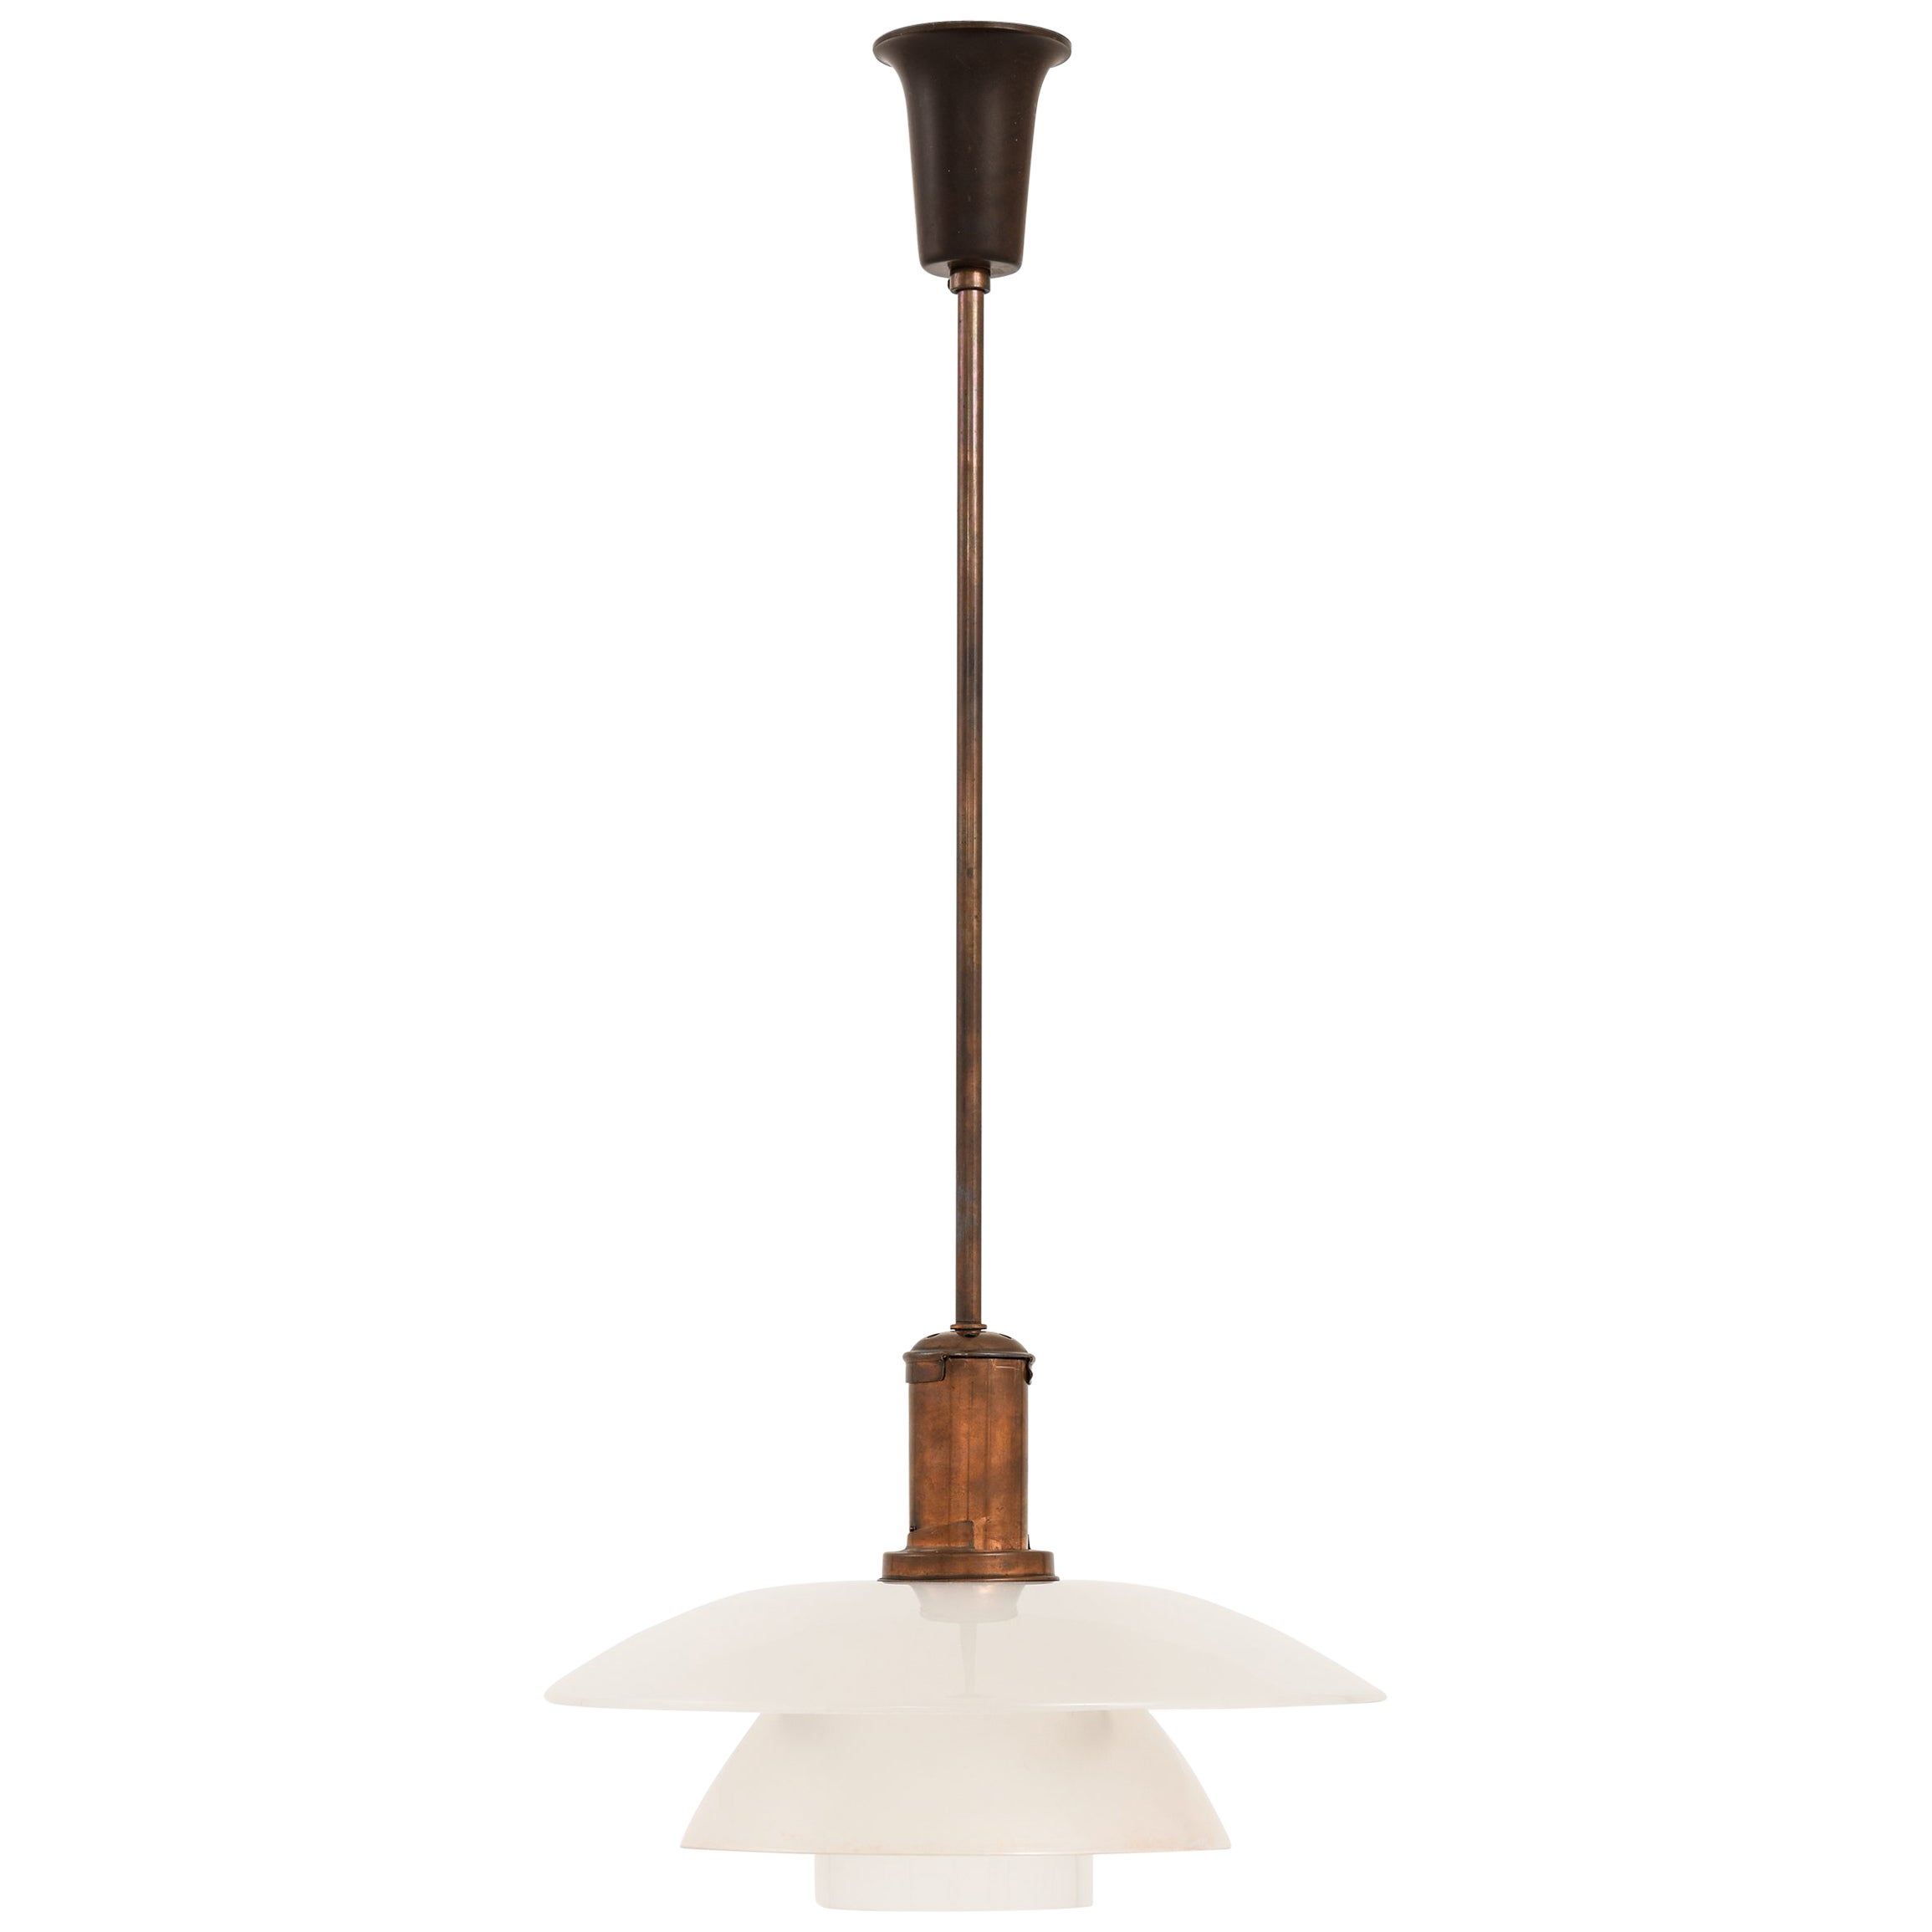 Ceiling Lamp in Copper-Plated Brass and Frosted Glass by Poul Henningsen, 1930's